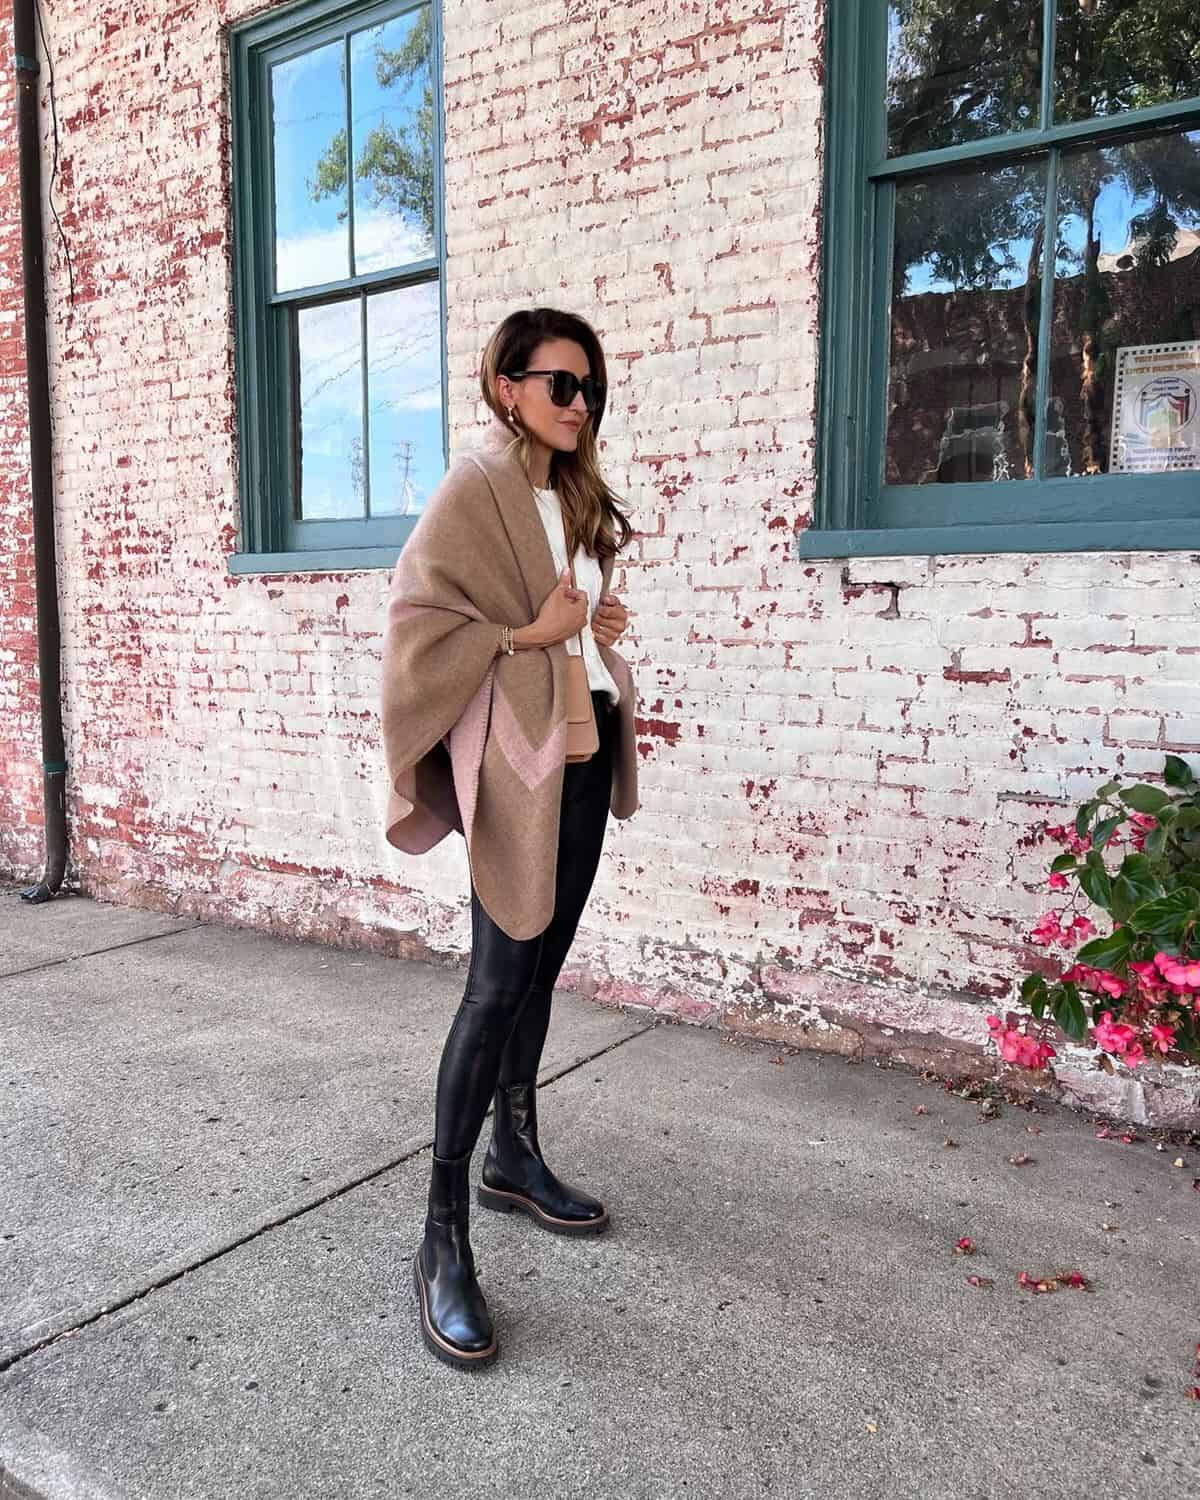 Karina wears walmart blanket scarf with sweater and faux leather leggings